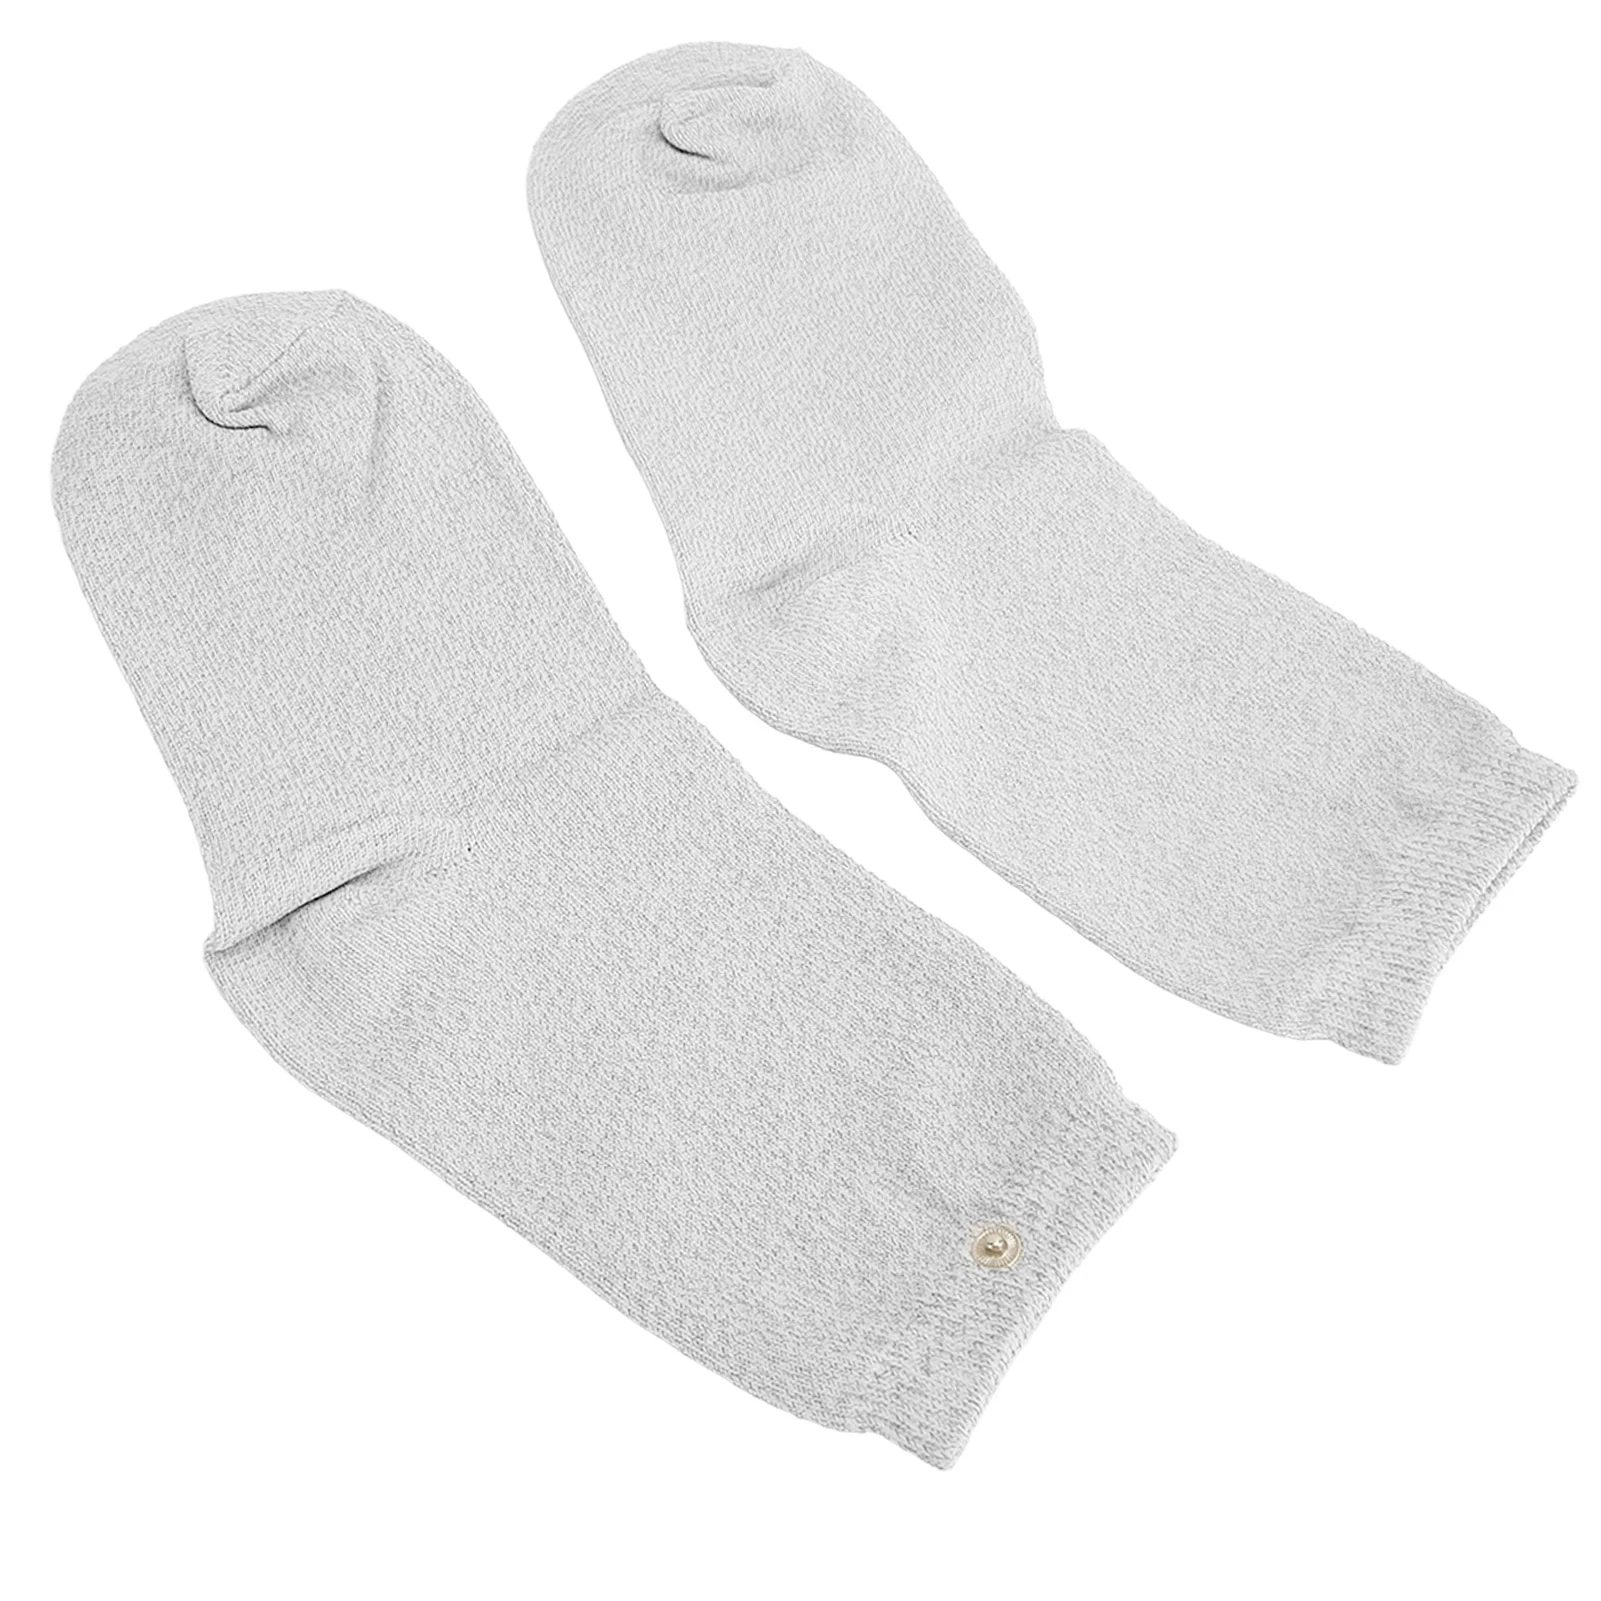 1 Pair of Conductive Socks Elastic Electric Therapy Silver Fiber Conductive Massage Electrode Socks for Arthritis saturated silver chloride electrode r0303 5 agcl silver silver chloride reference electrode can be invoiced